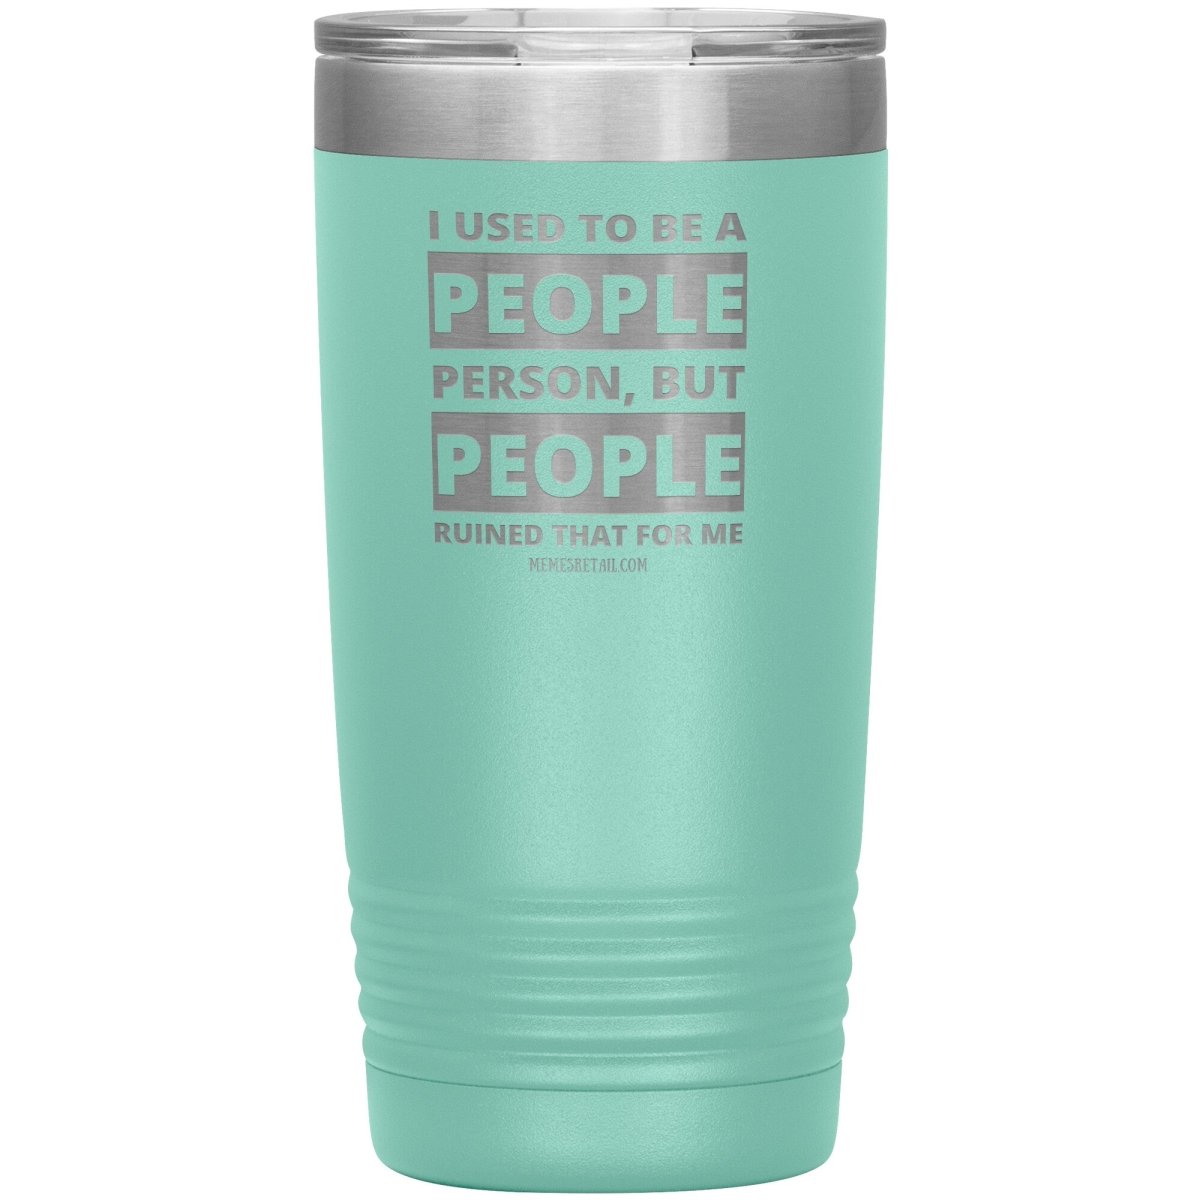 I Used To Be A People Person, But People Ruined That For Me Tumblers, 20oz Insulated Tumbler / Teal - MemesRetail.com